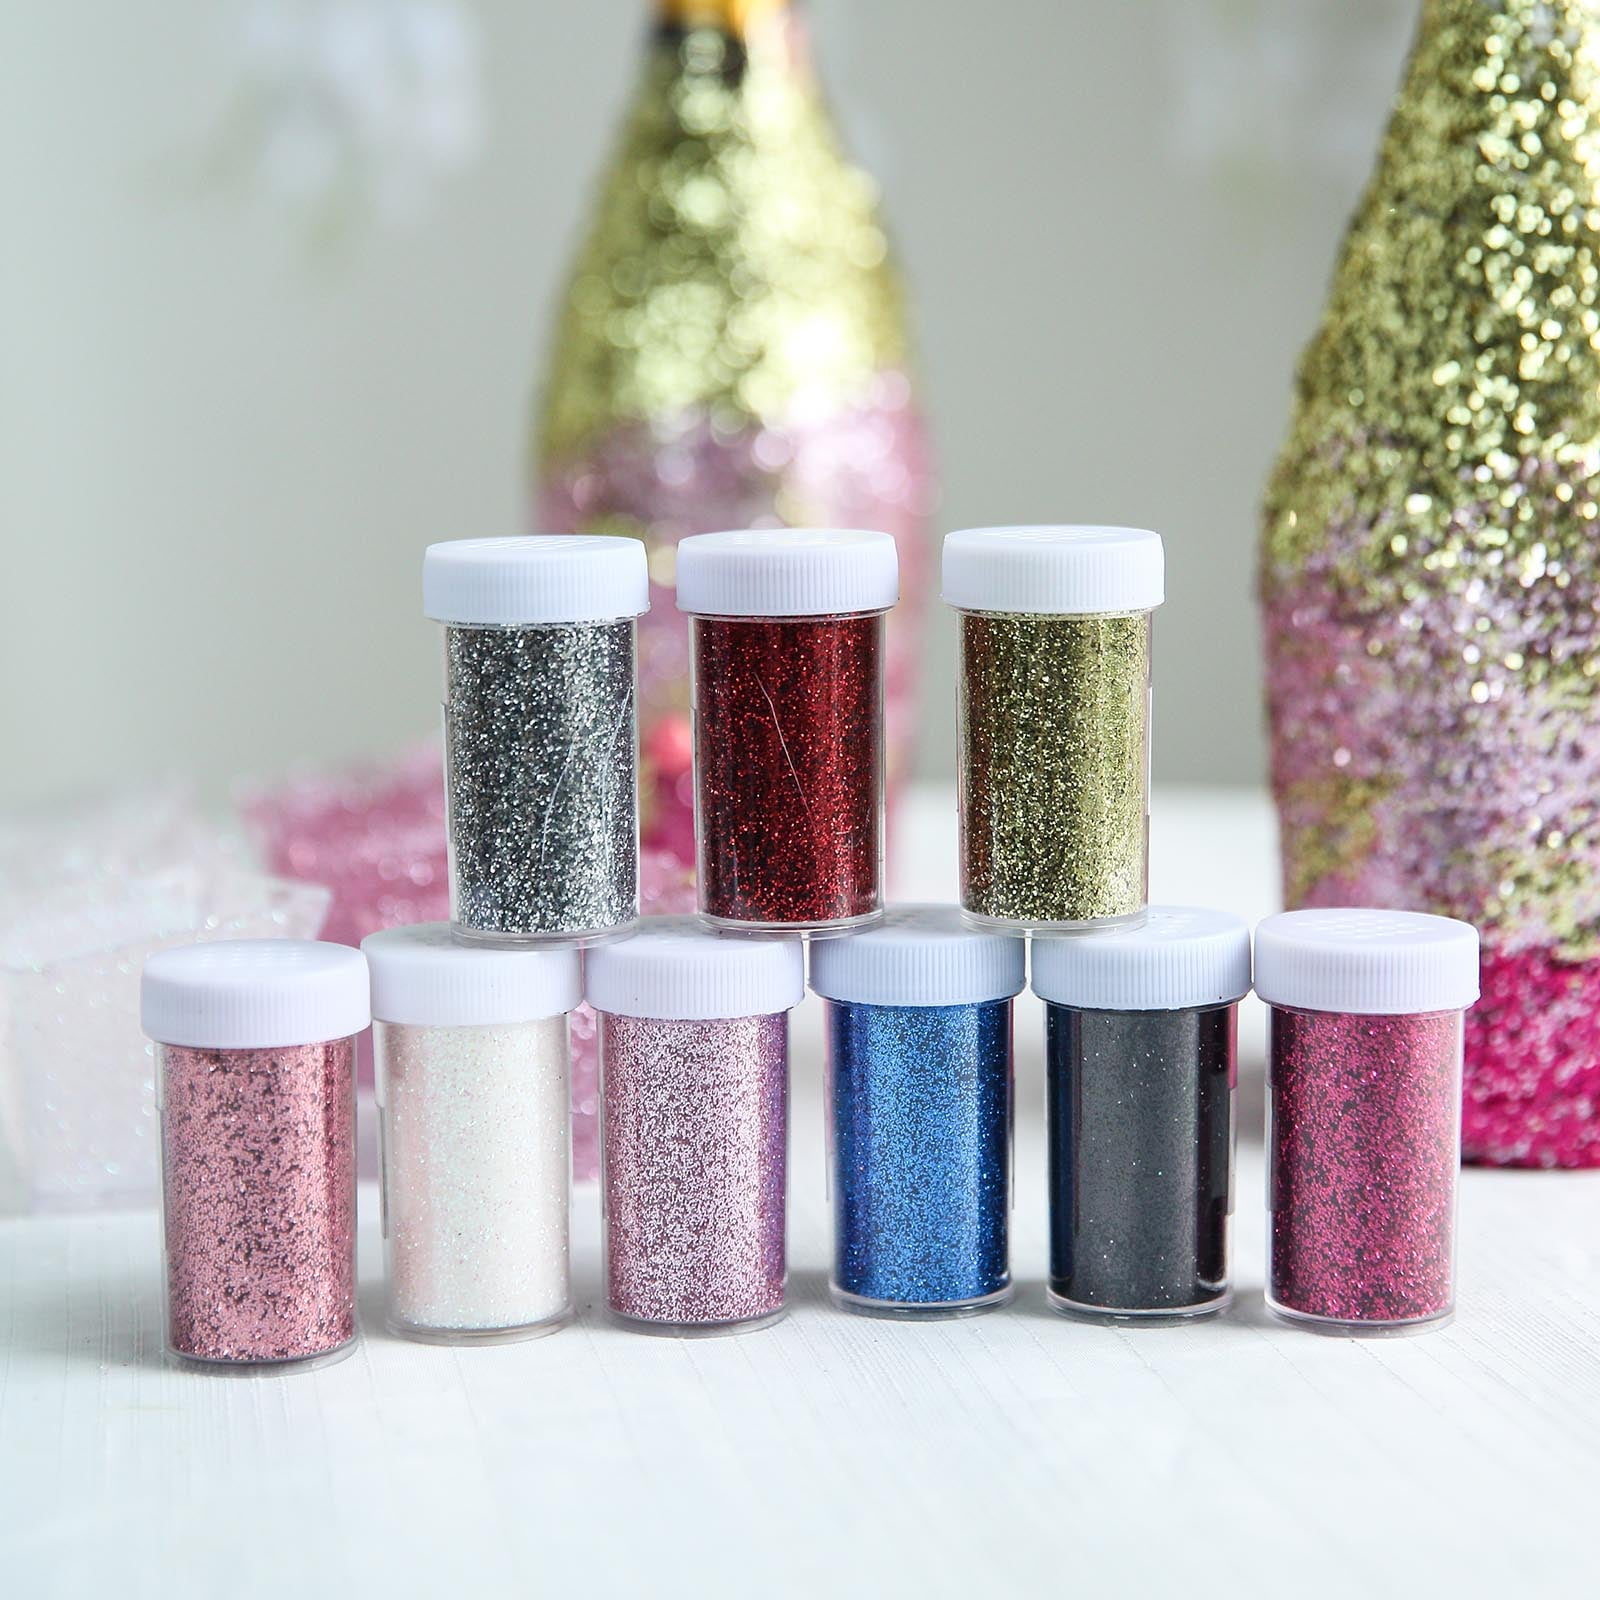 Buy 23 Grams Rose Gold Extra Fine Glitters  Craft Glitter Powder - Pack of  1 Bottle at Tablecloth Factory